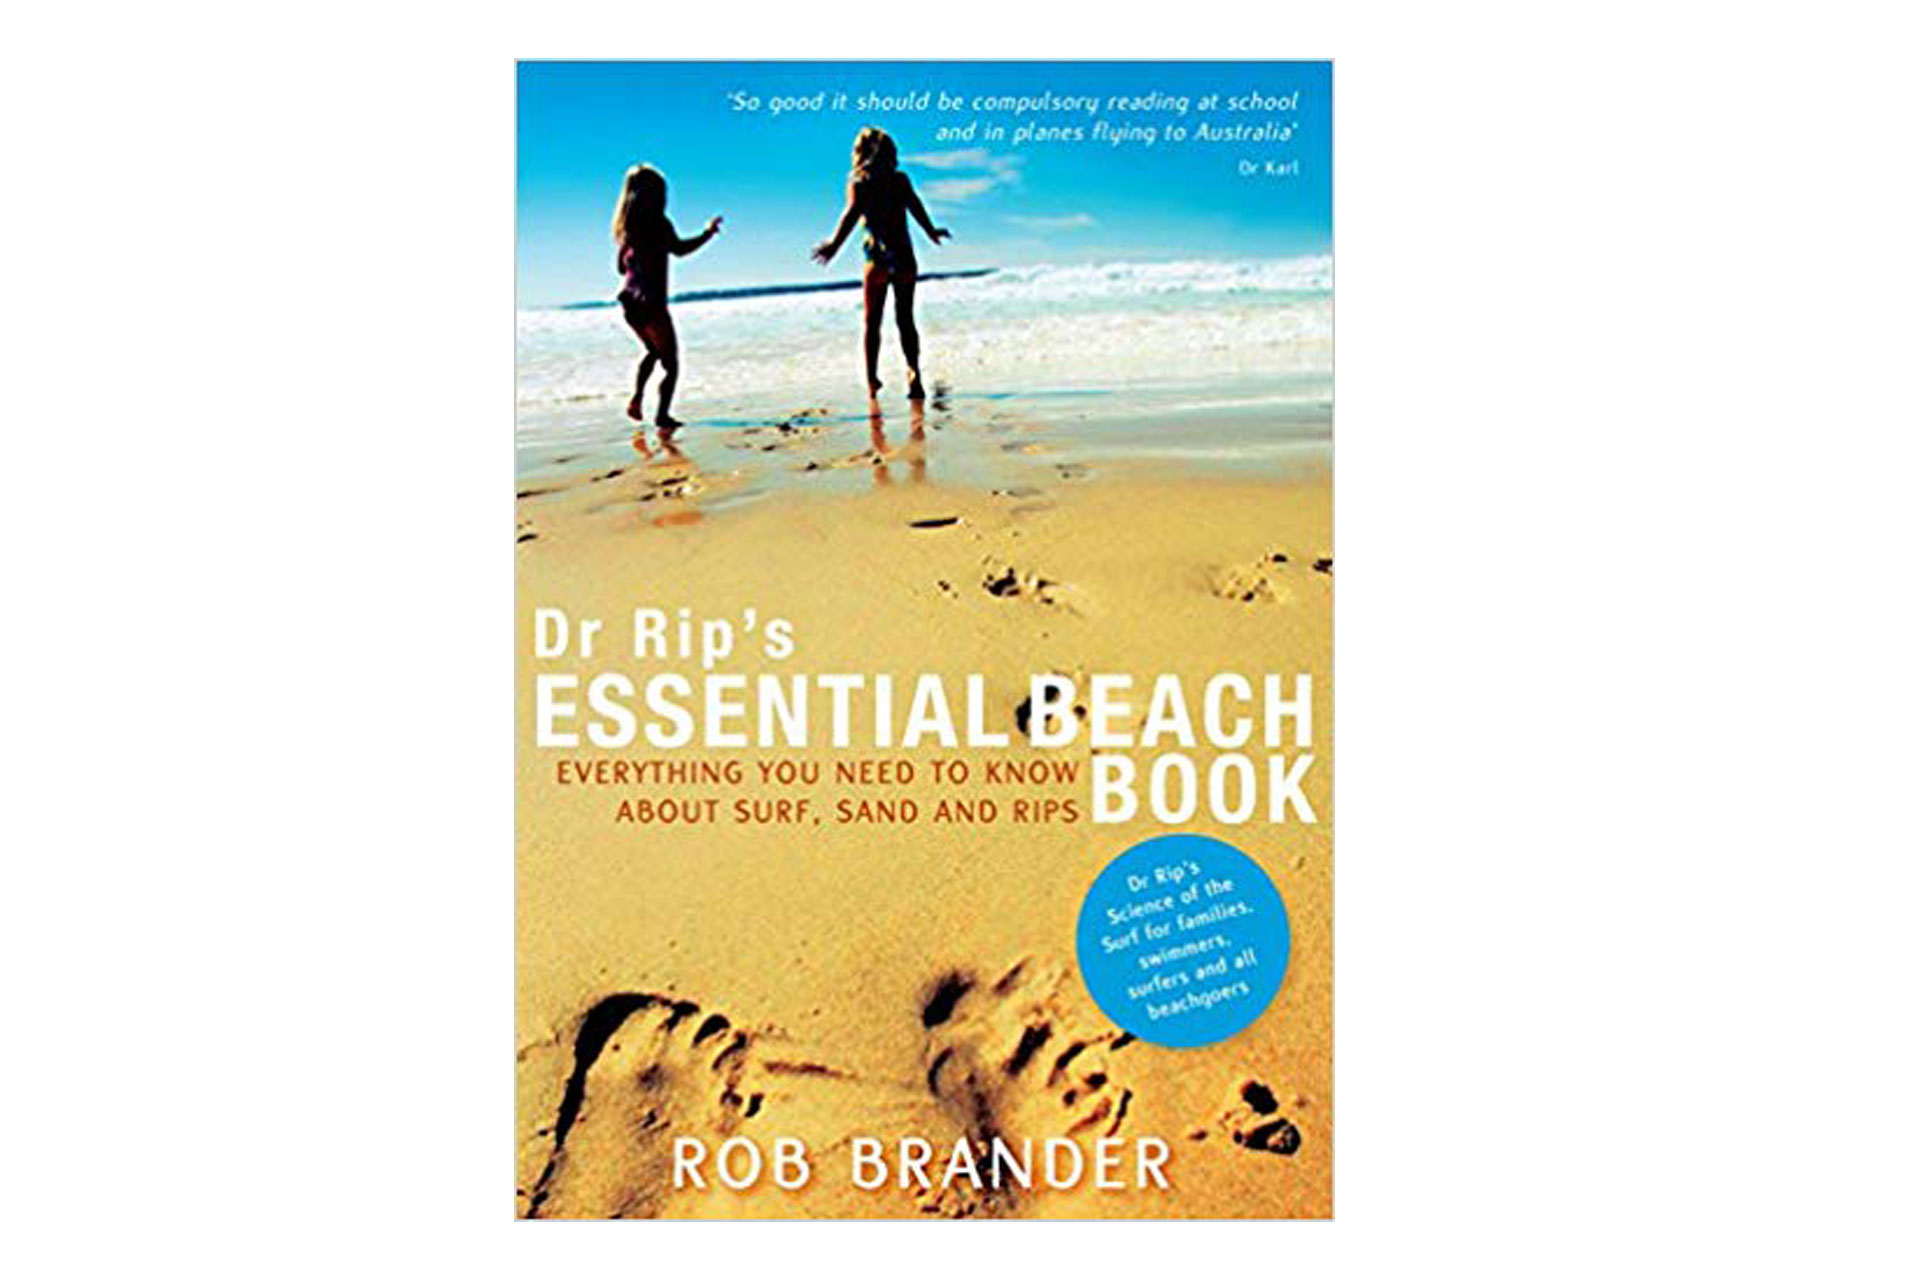 Dr. Rip's Essential Beach Book; Courtesy of Amazon